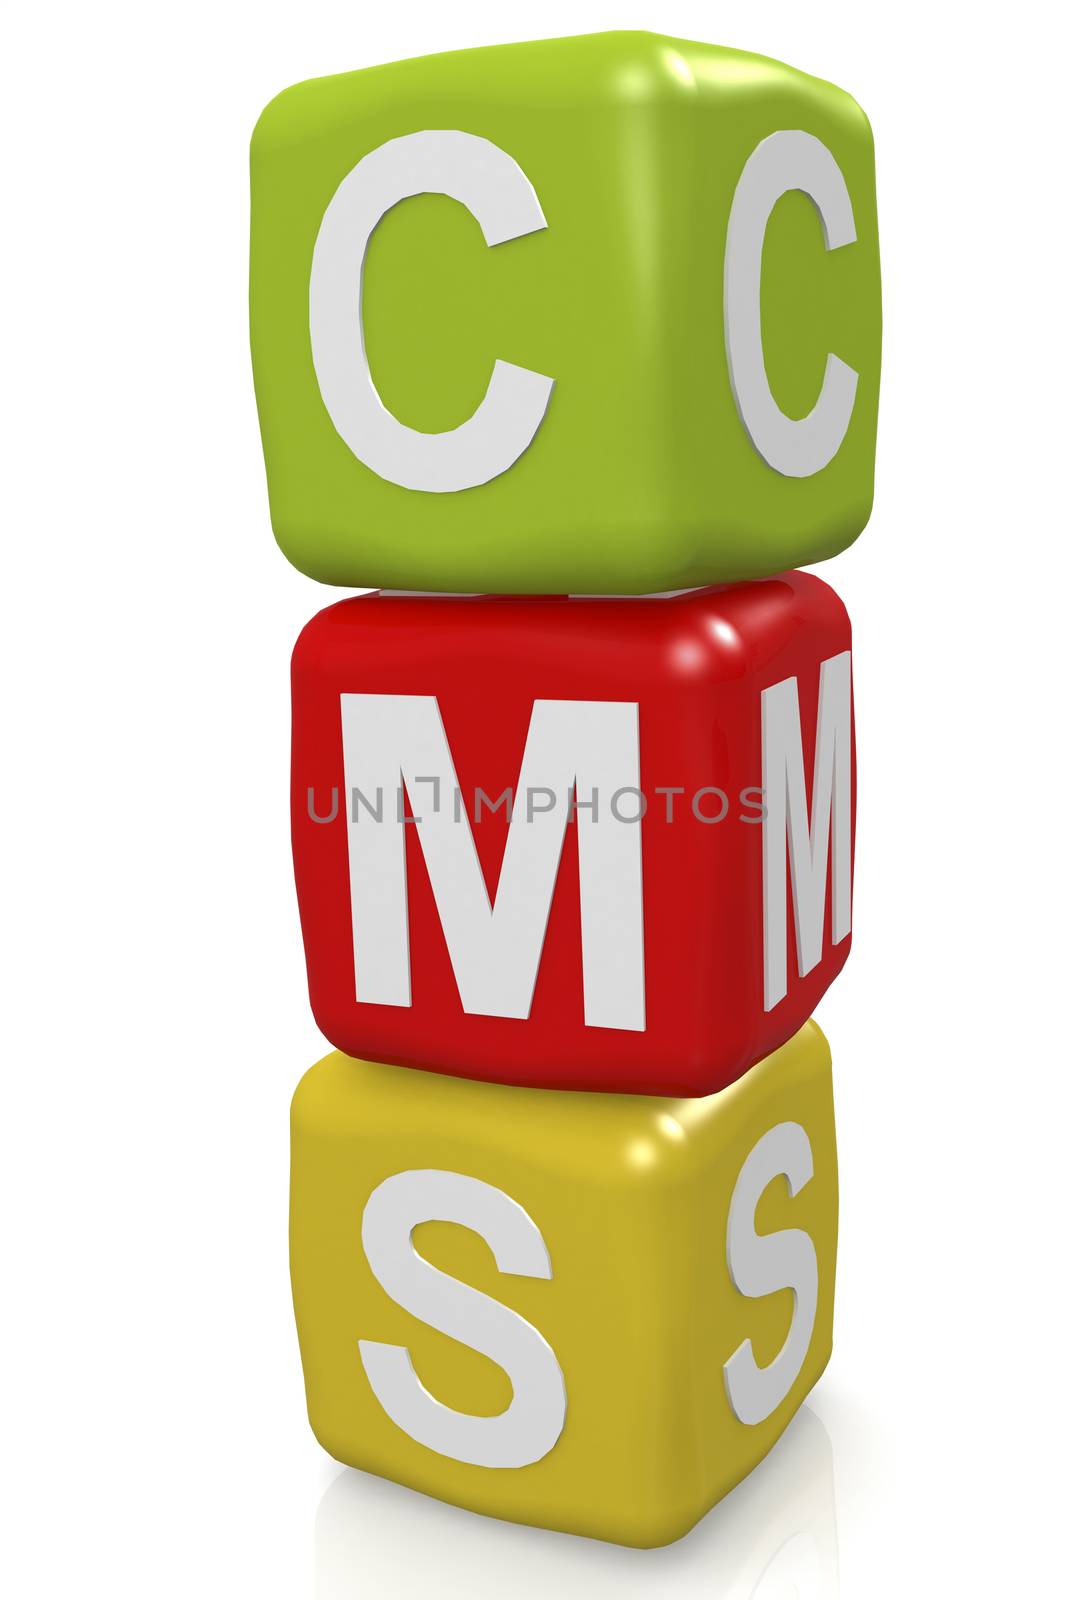 CMS on a colorful cube block, 3D rendering